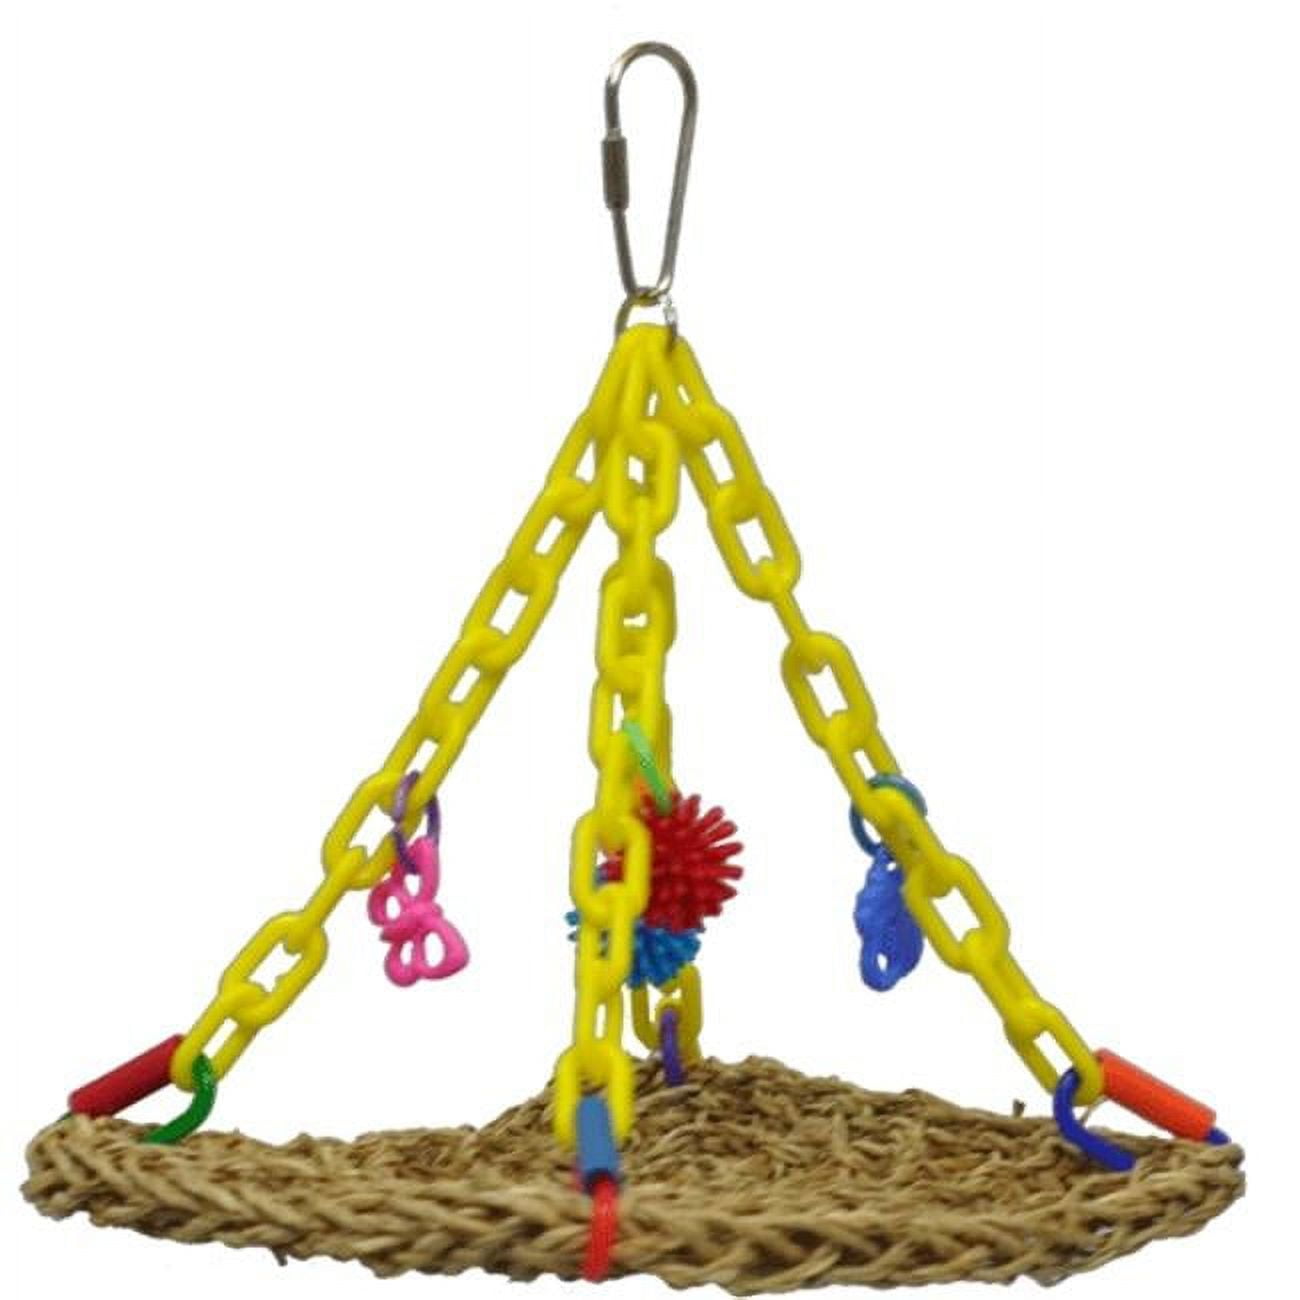 Hb900 9 X 7 X 6.5 In. Hanging Vine Mat - Small